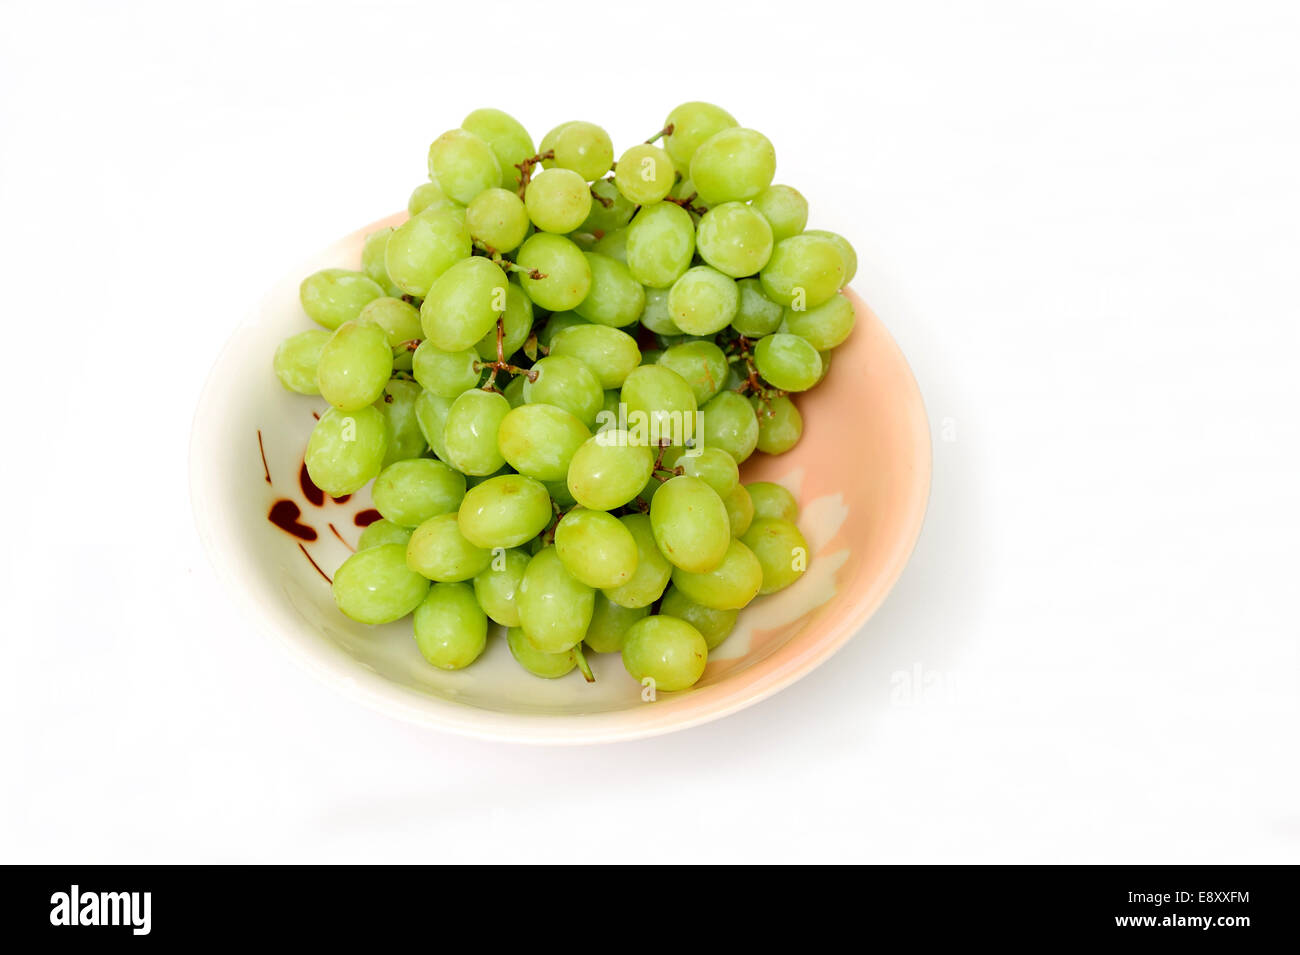 Green Grapes In A Bowl Stock Photo